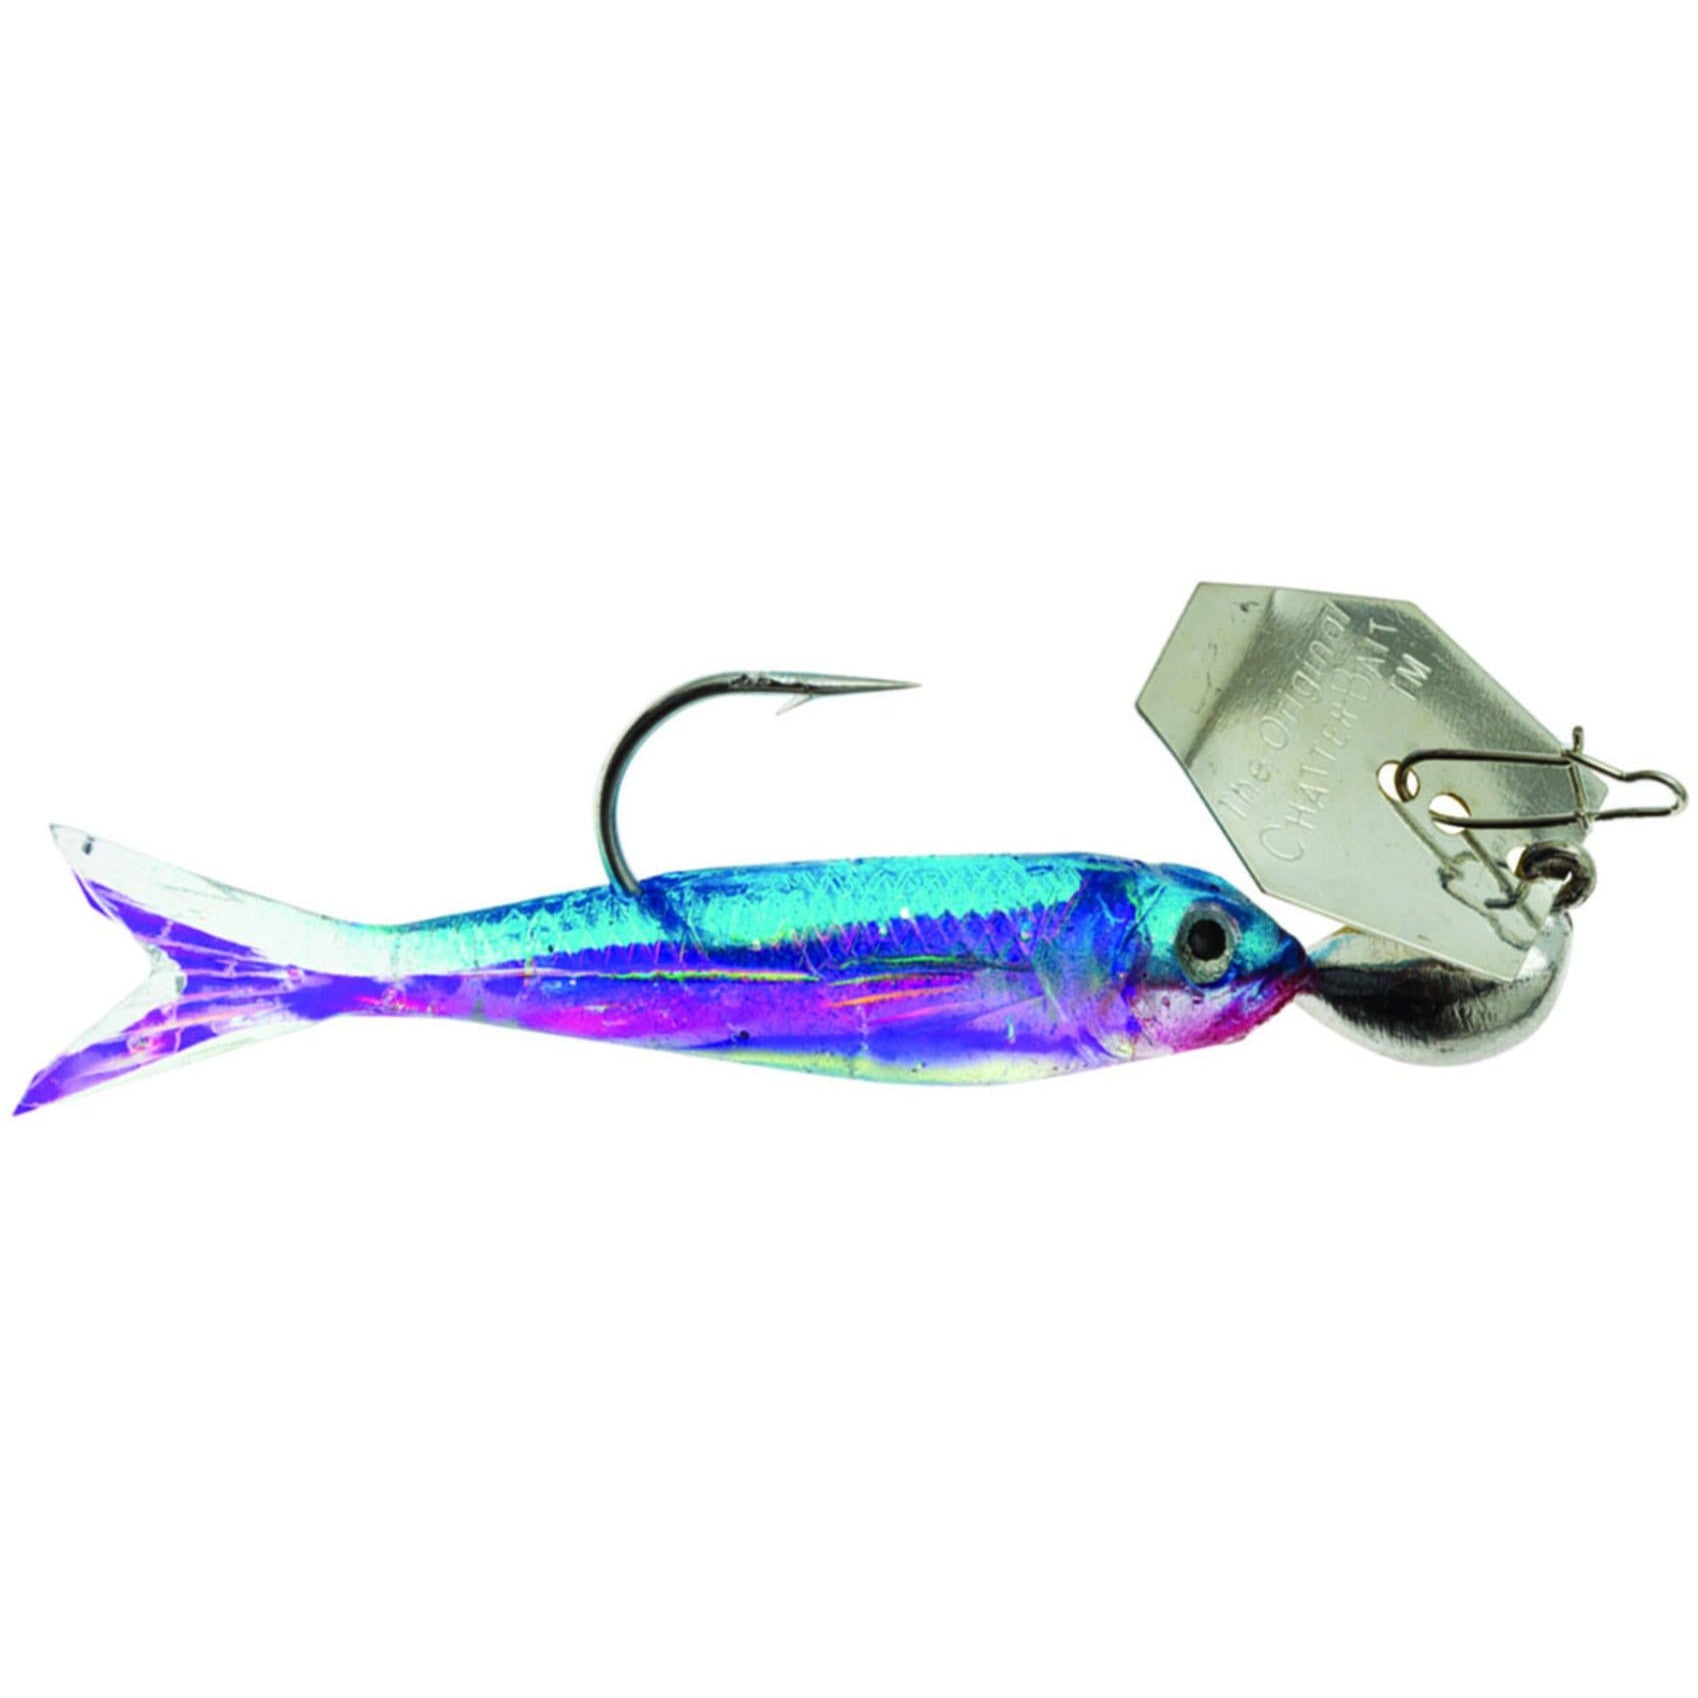 Z-Man Chatterbait Mini Max – Choice of Colors and Sizes – La